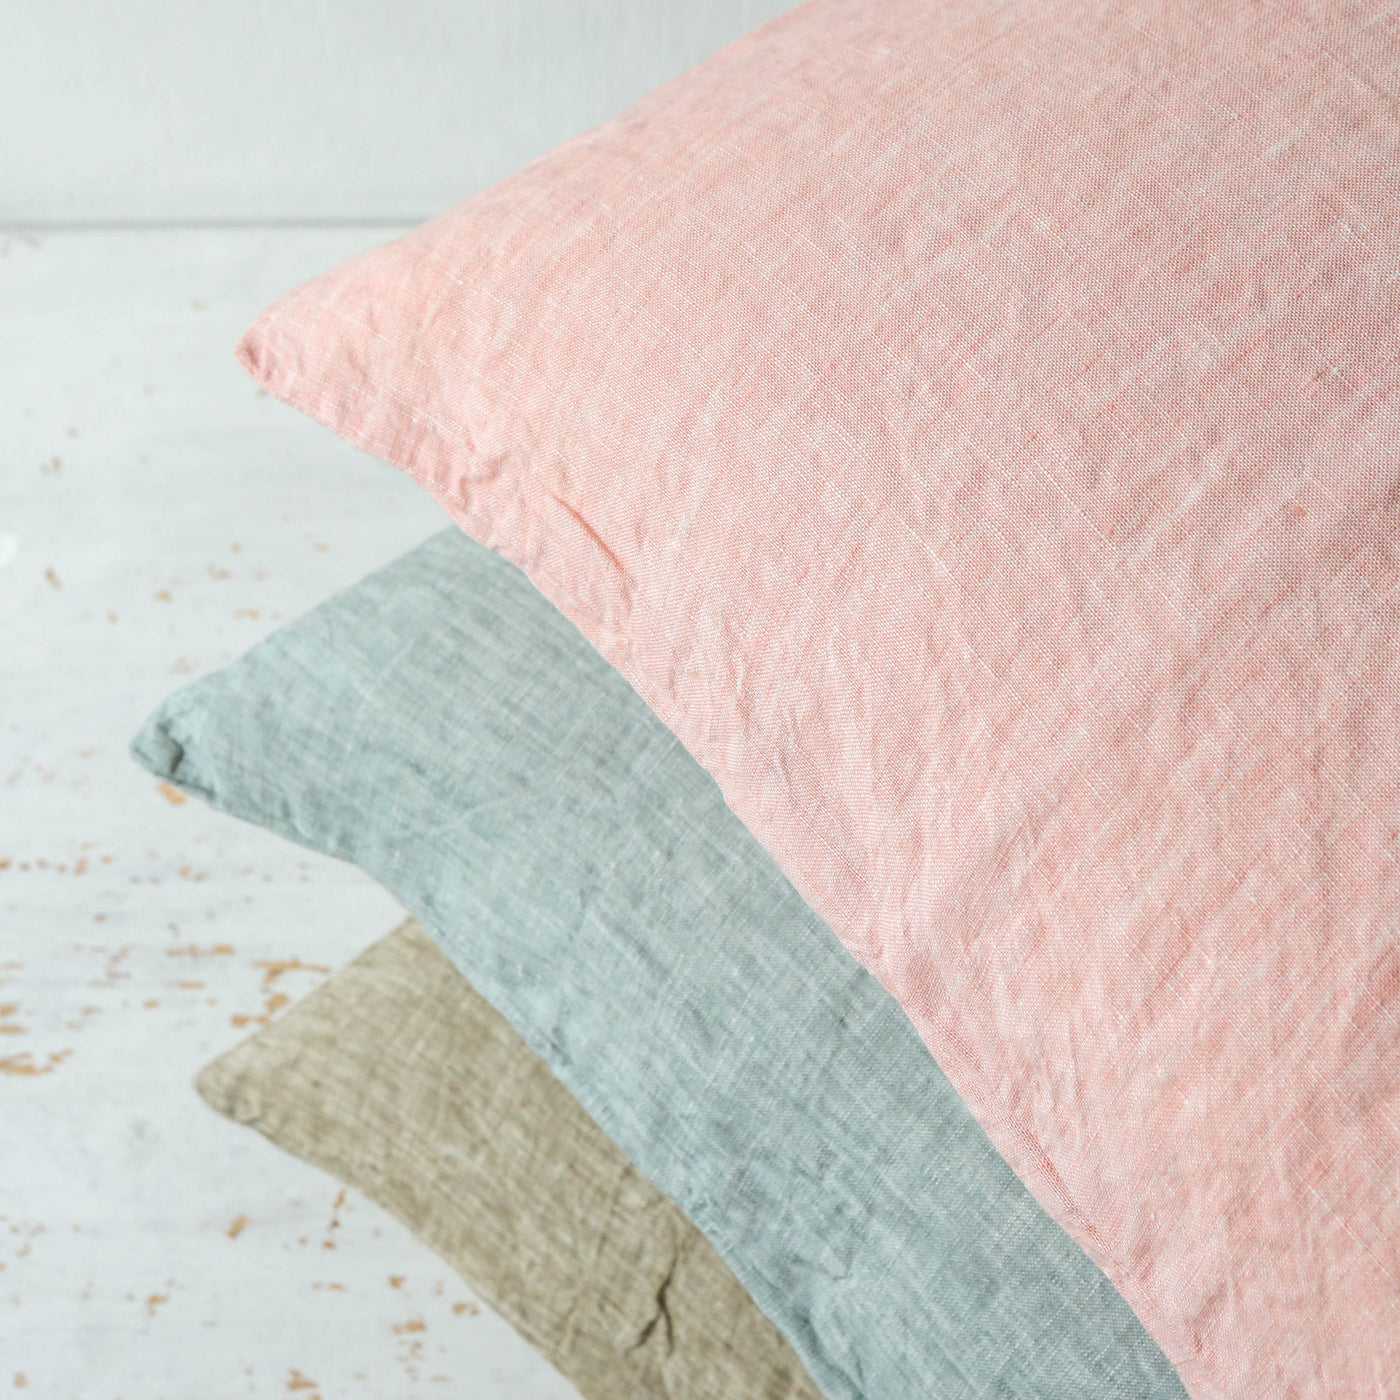 Linen Chambray Cushion Cover - Moss